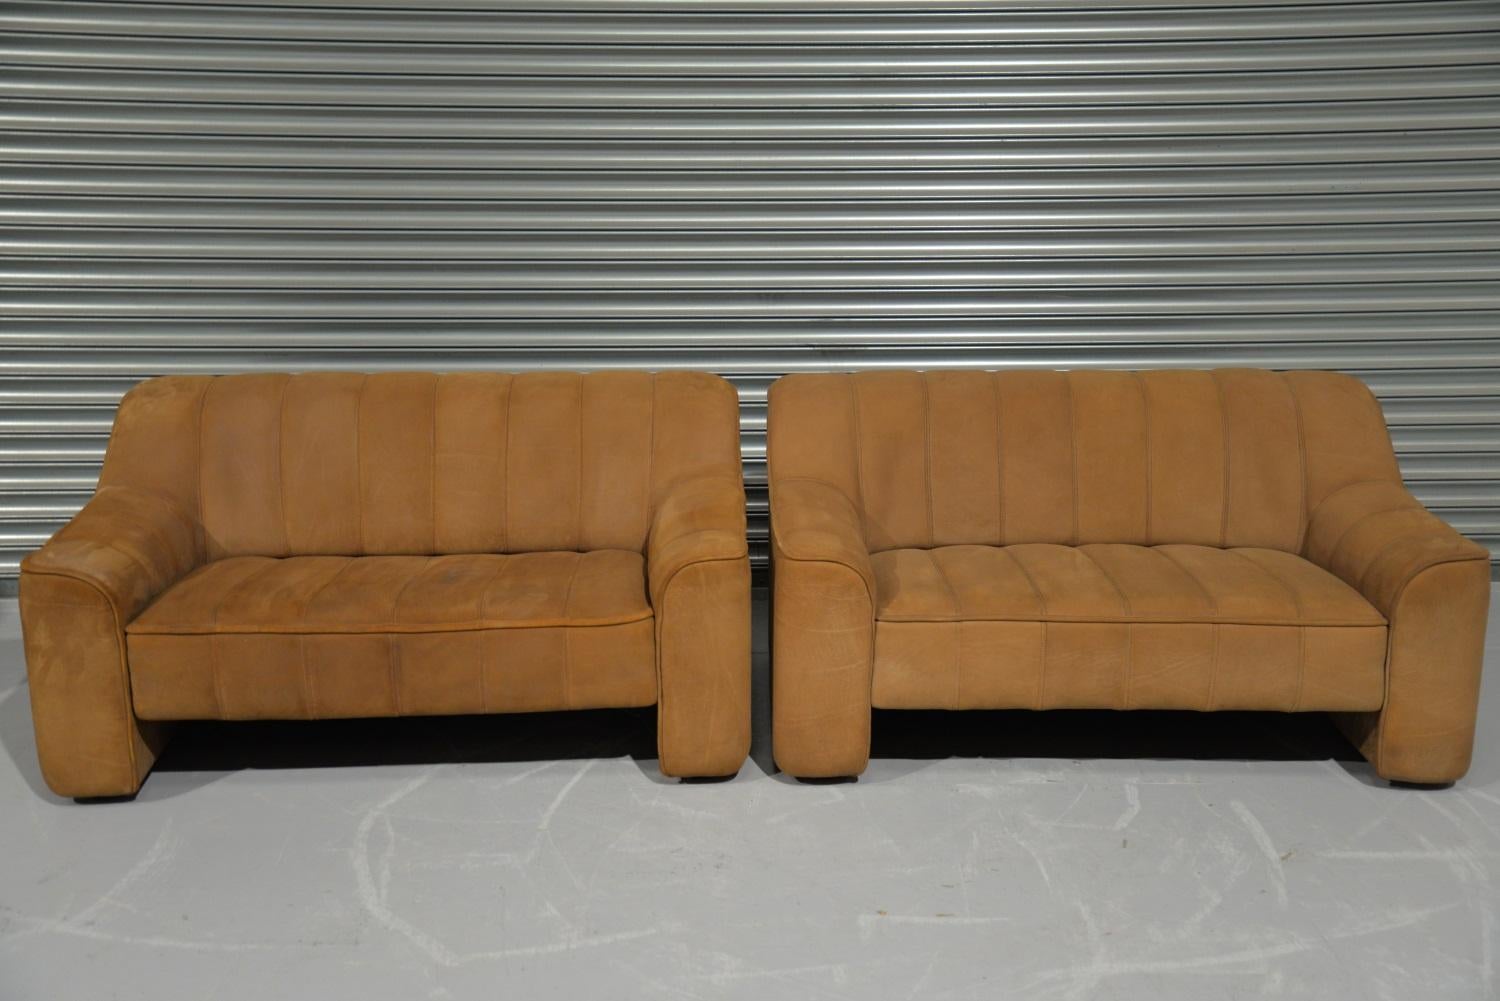 Late 20th Century Vintage De Sede DS 44 Two-Seat Neck Leather Sofas / Loveseats, Switzerland 1970s